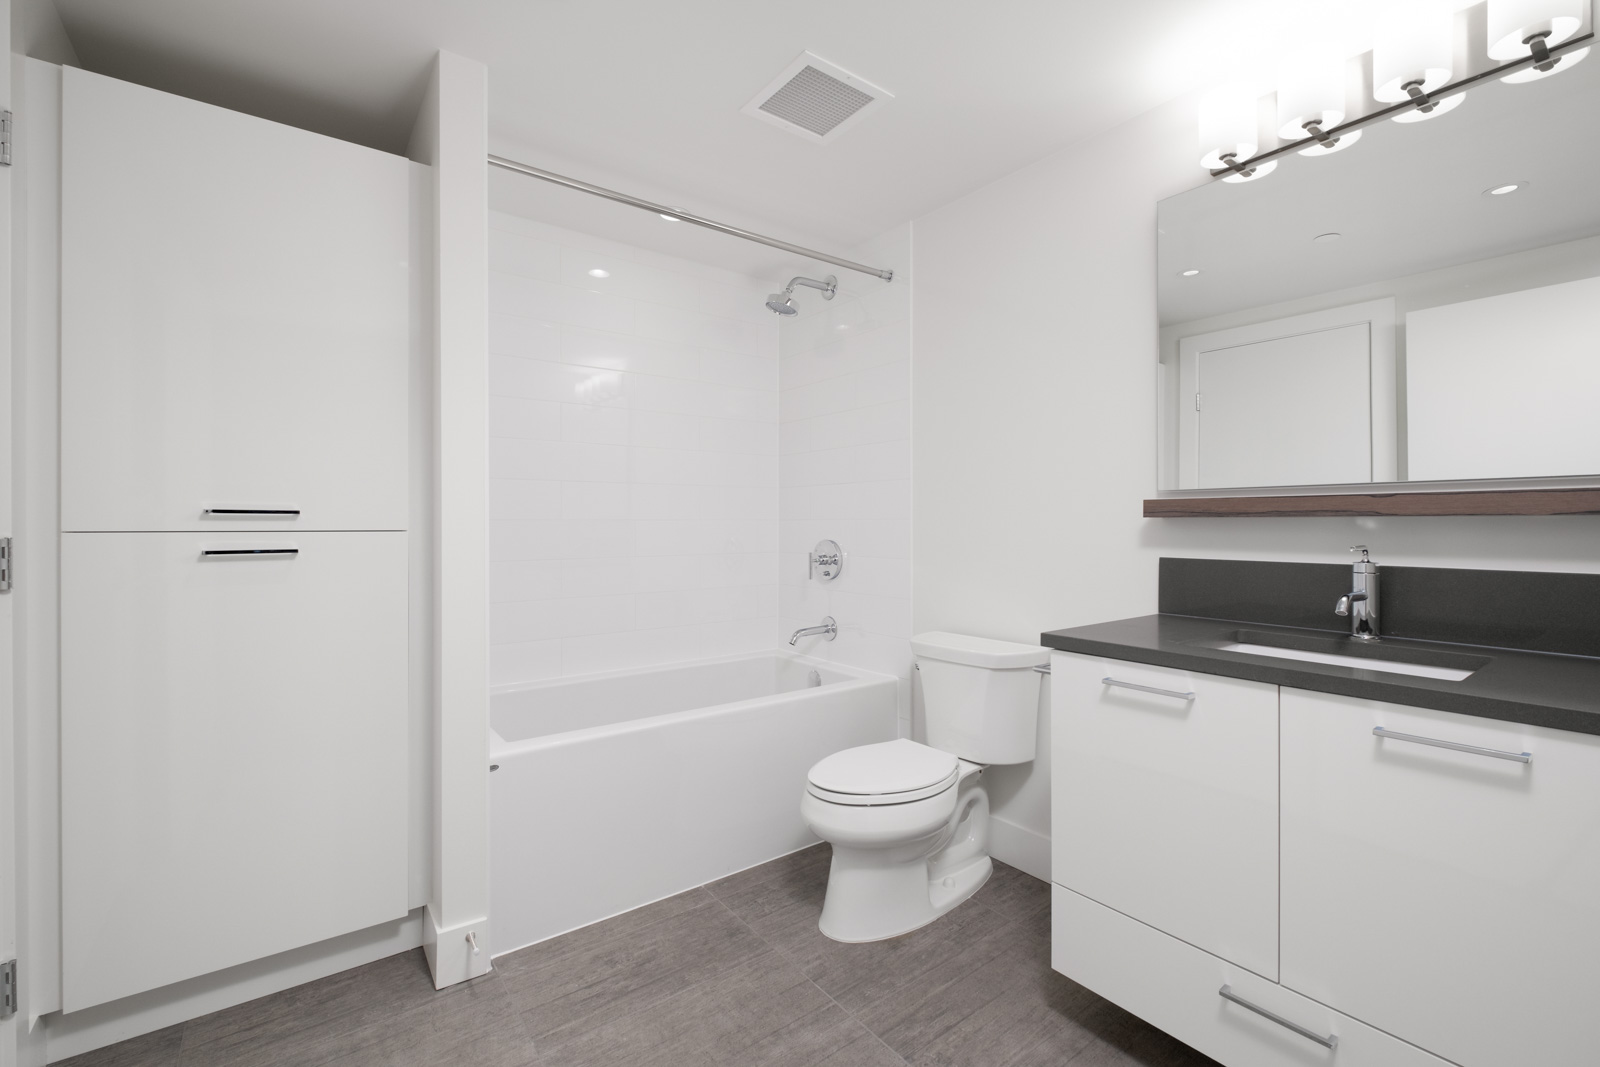 bathroom with white walls and hardwood floors in rental condo in the Brewery District neighbourhood of New Westminster